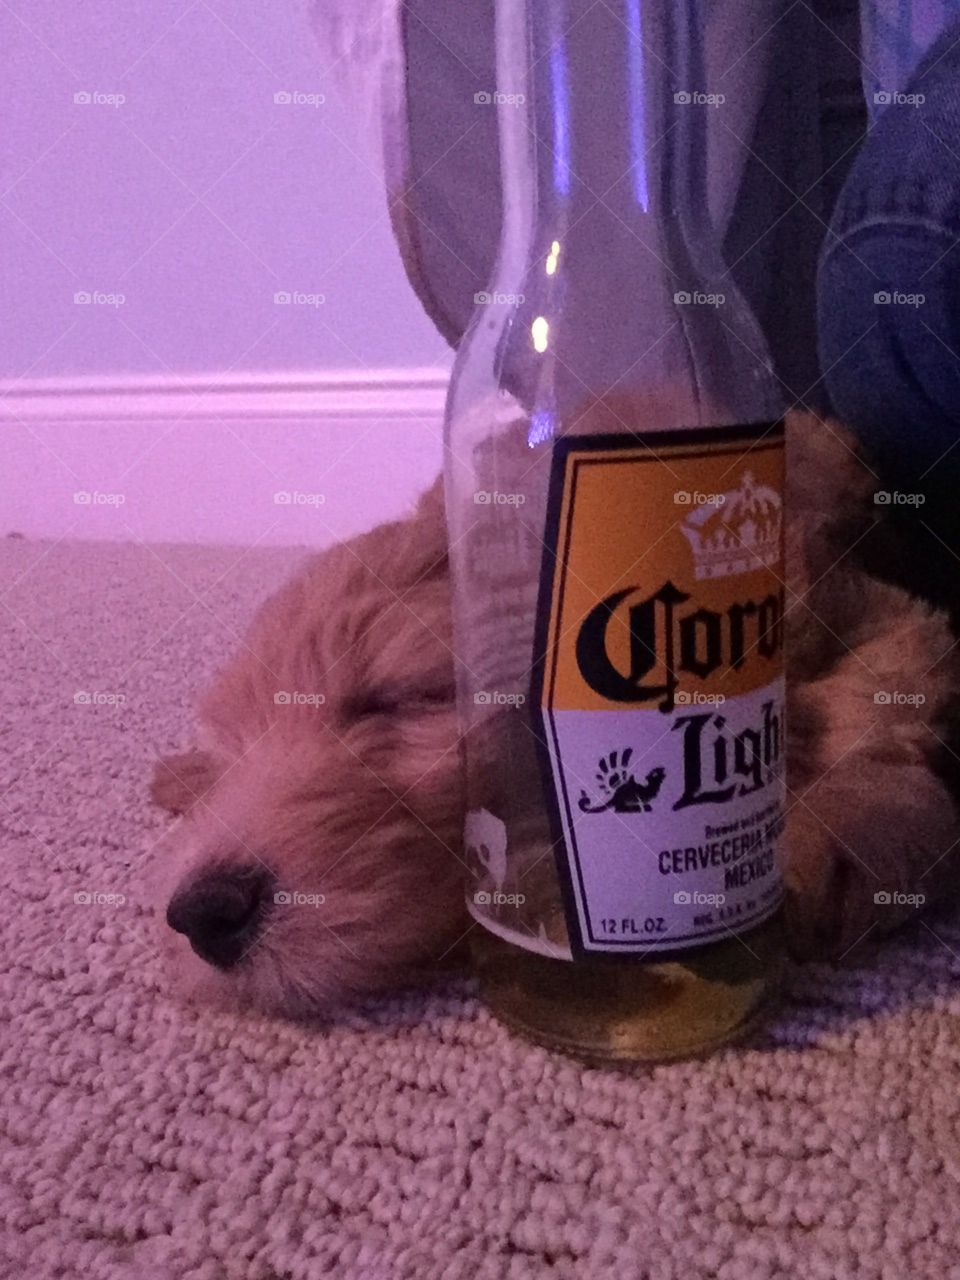 Puppy with beer